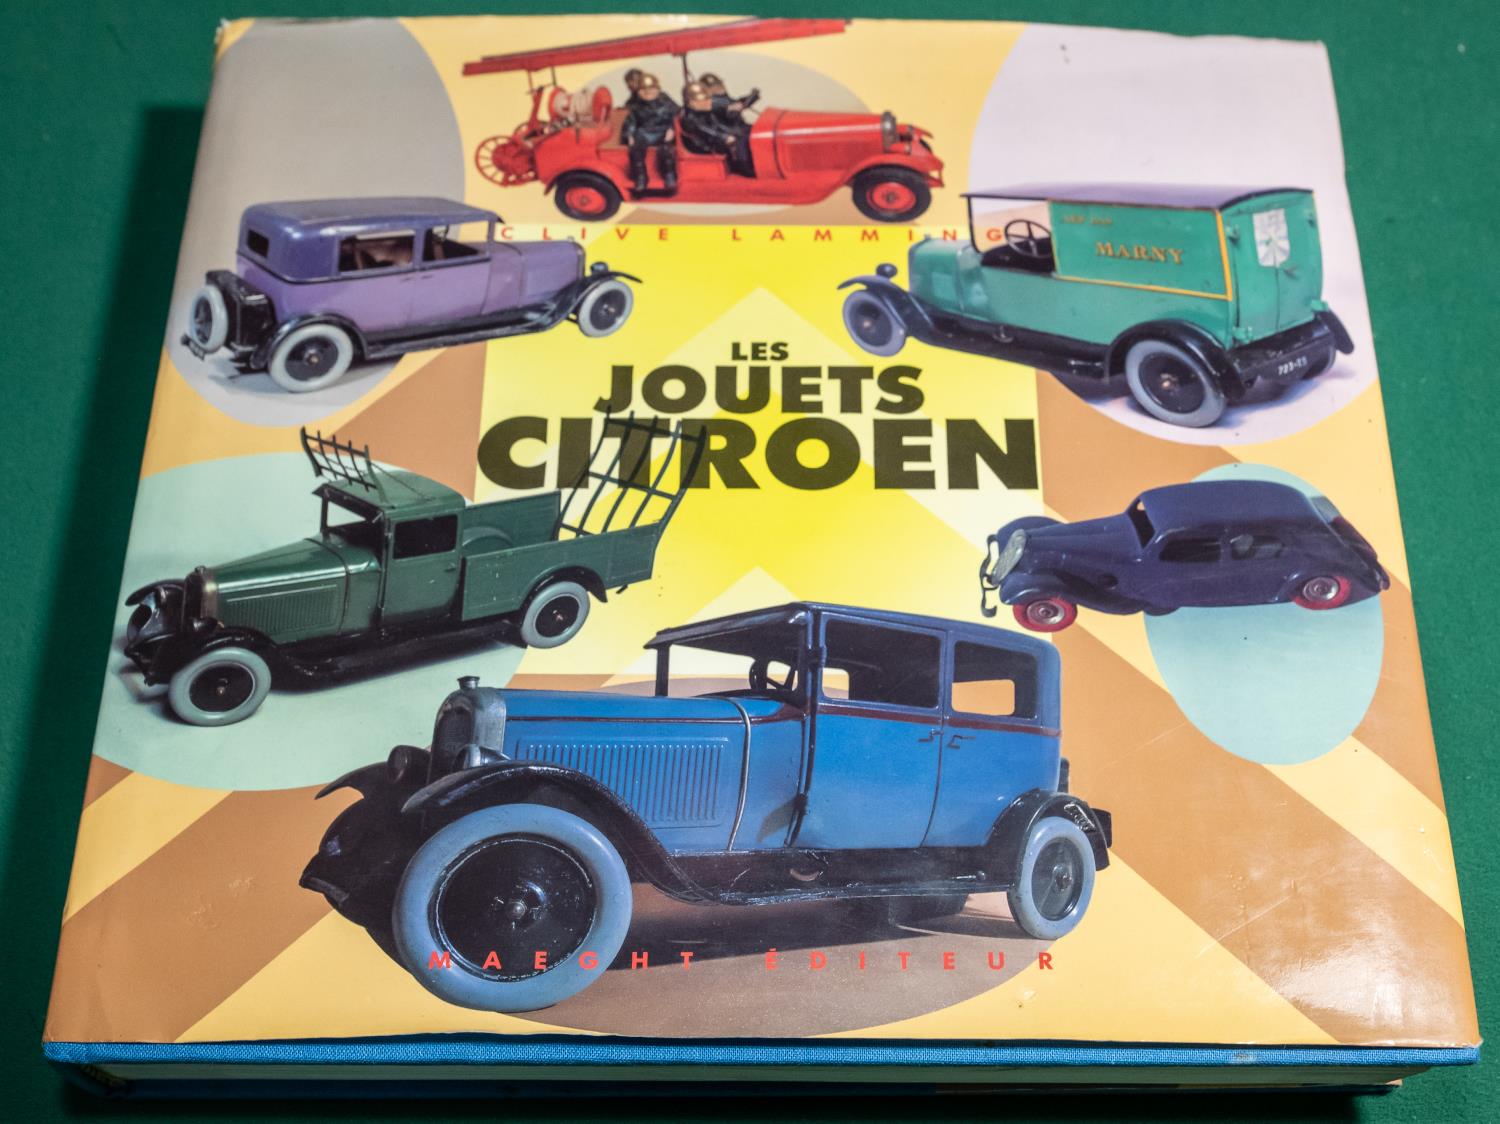 Les Jouets Citroen book by Clive Lamming, Maeght Editeur. Book is in French Language and details the